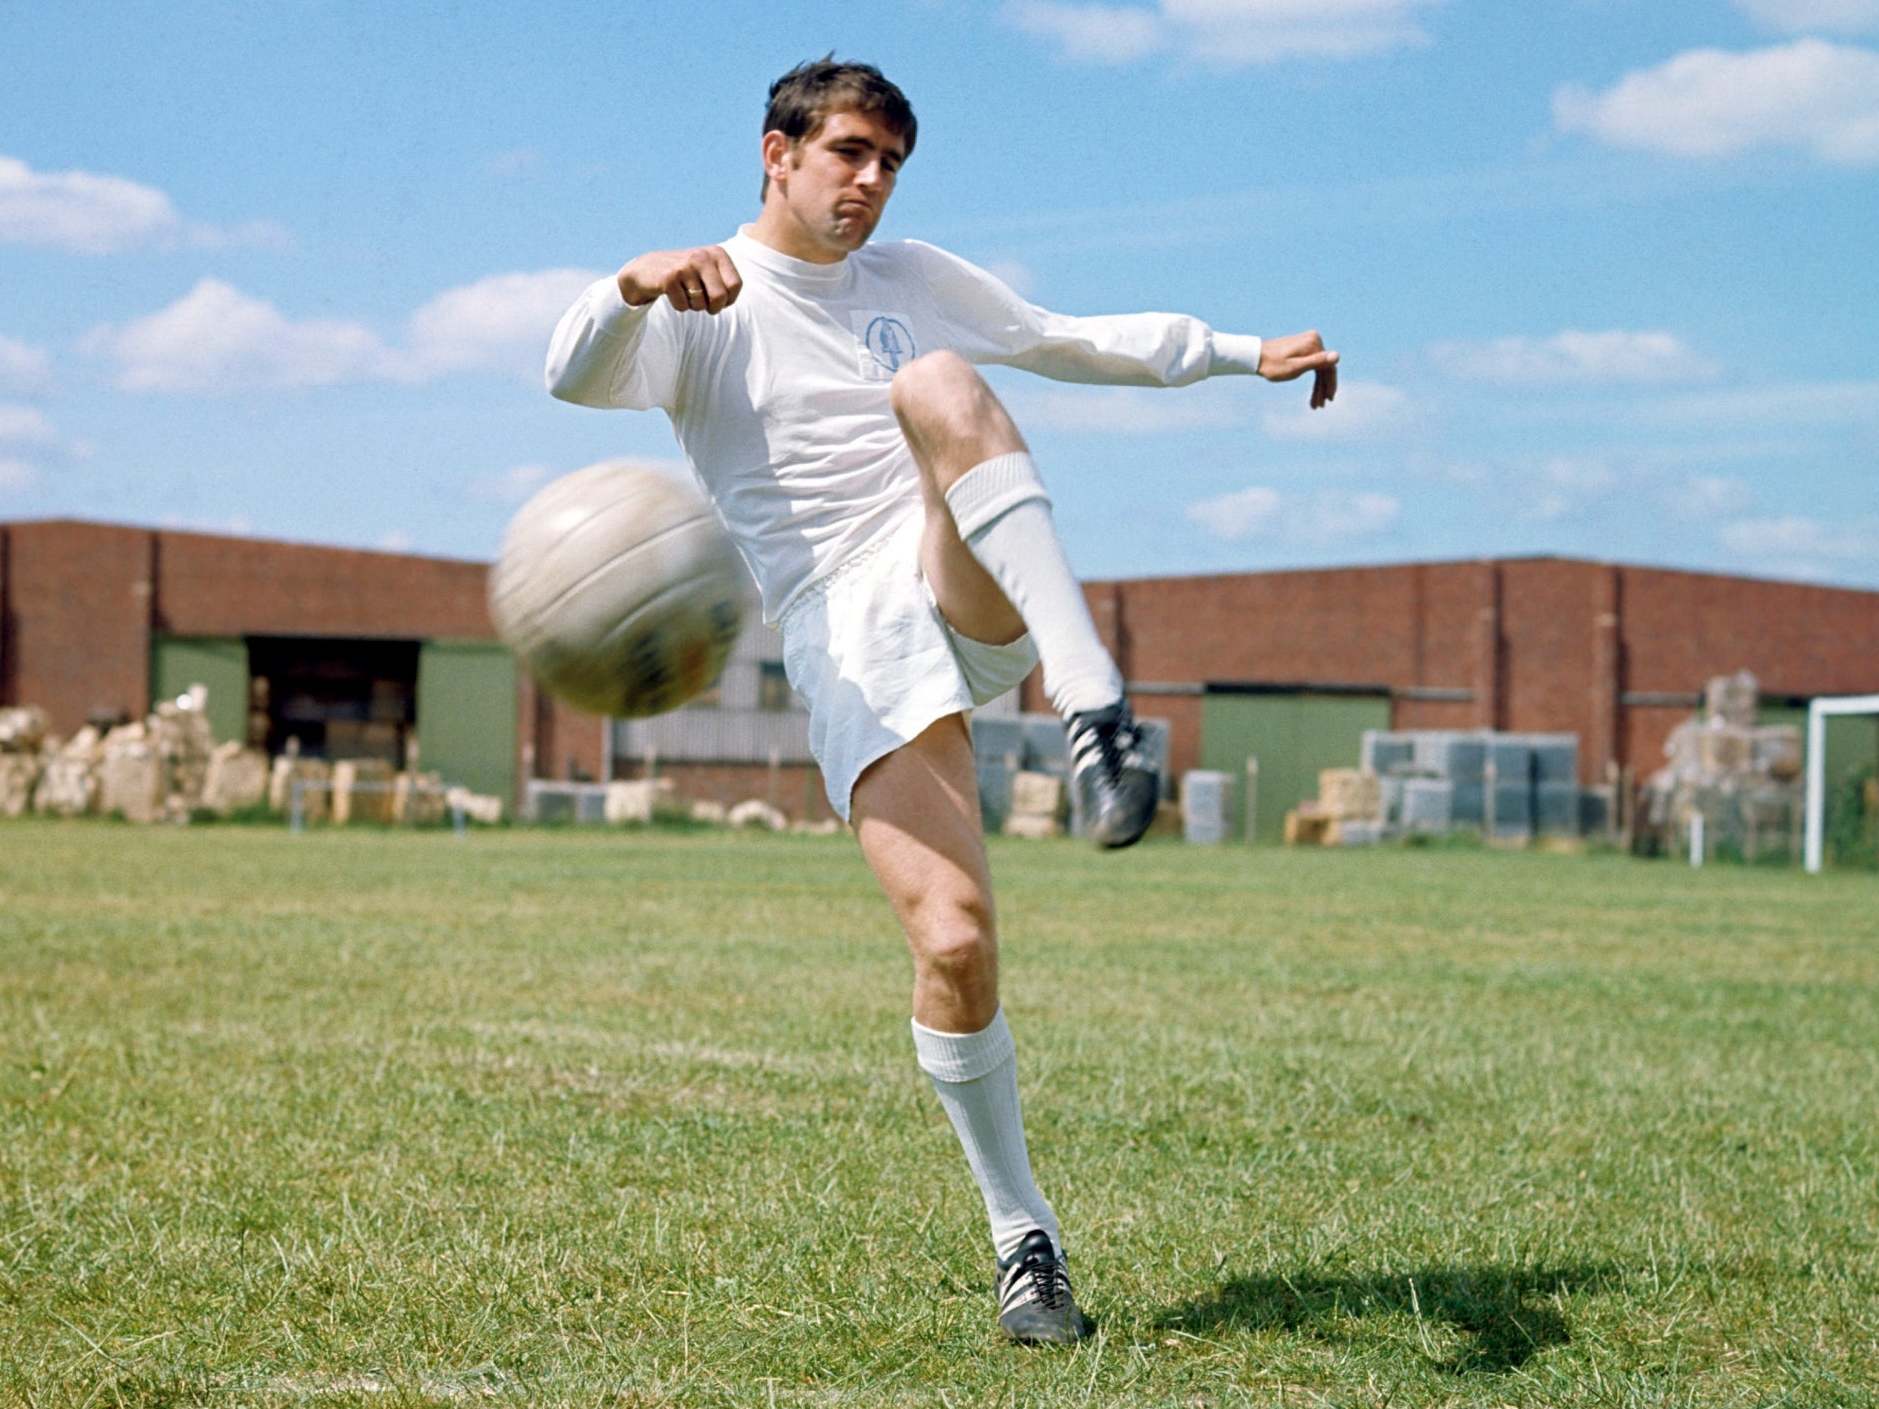 Hunter in 1969, the year Leeds United first won the league title